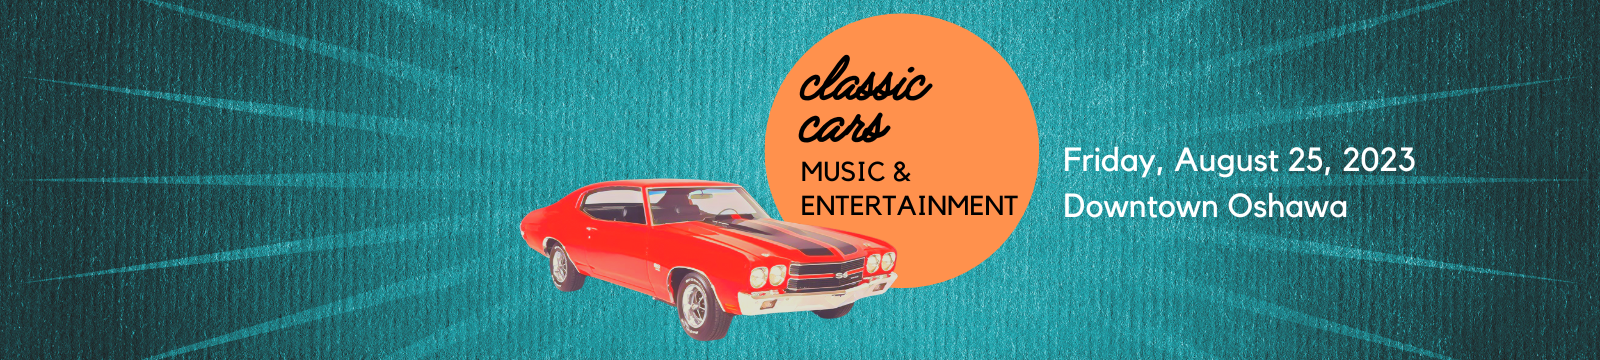 Vintage Car with Sun that says classic cars, music and entertainment Friday august 25, downtown Oshawa